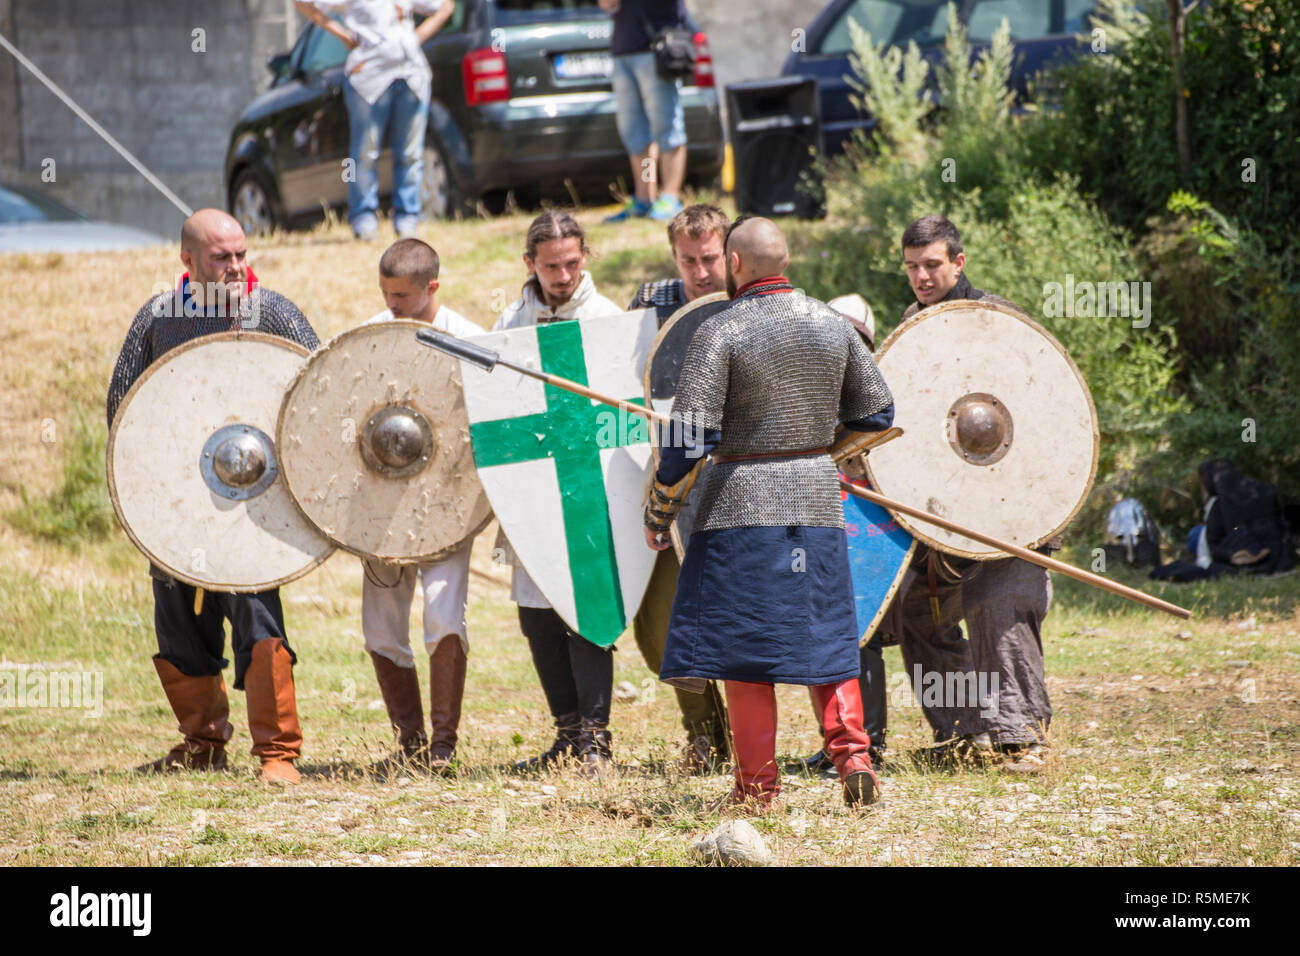 ASENVOGRAD, BULGARIA - JUNE 25, 2016 - Medieval fair in Asenovgrad recreating the life of Bulgarians during the Middle ages. Demonstration of a defenc Stock Photo